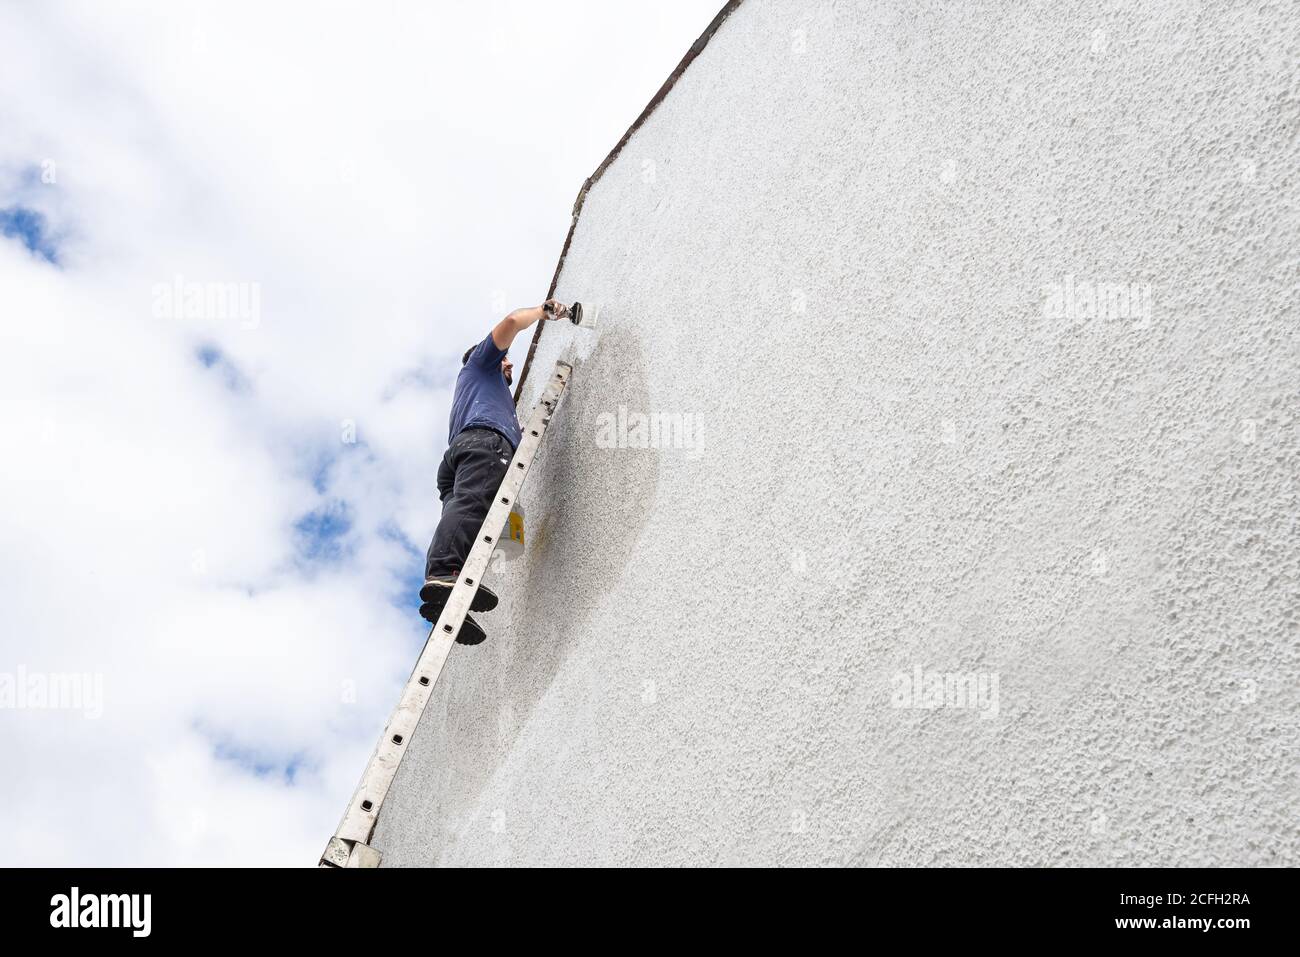 Hardworking man high up a ladder paints side of house a fresh white colour. Stock Photo